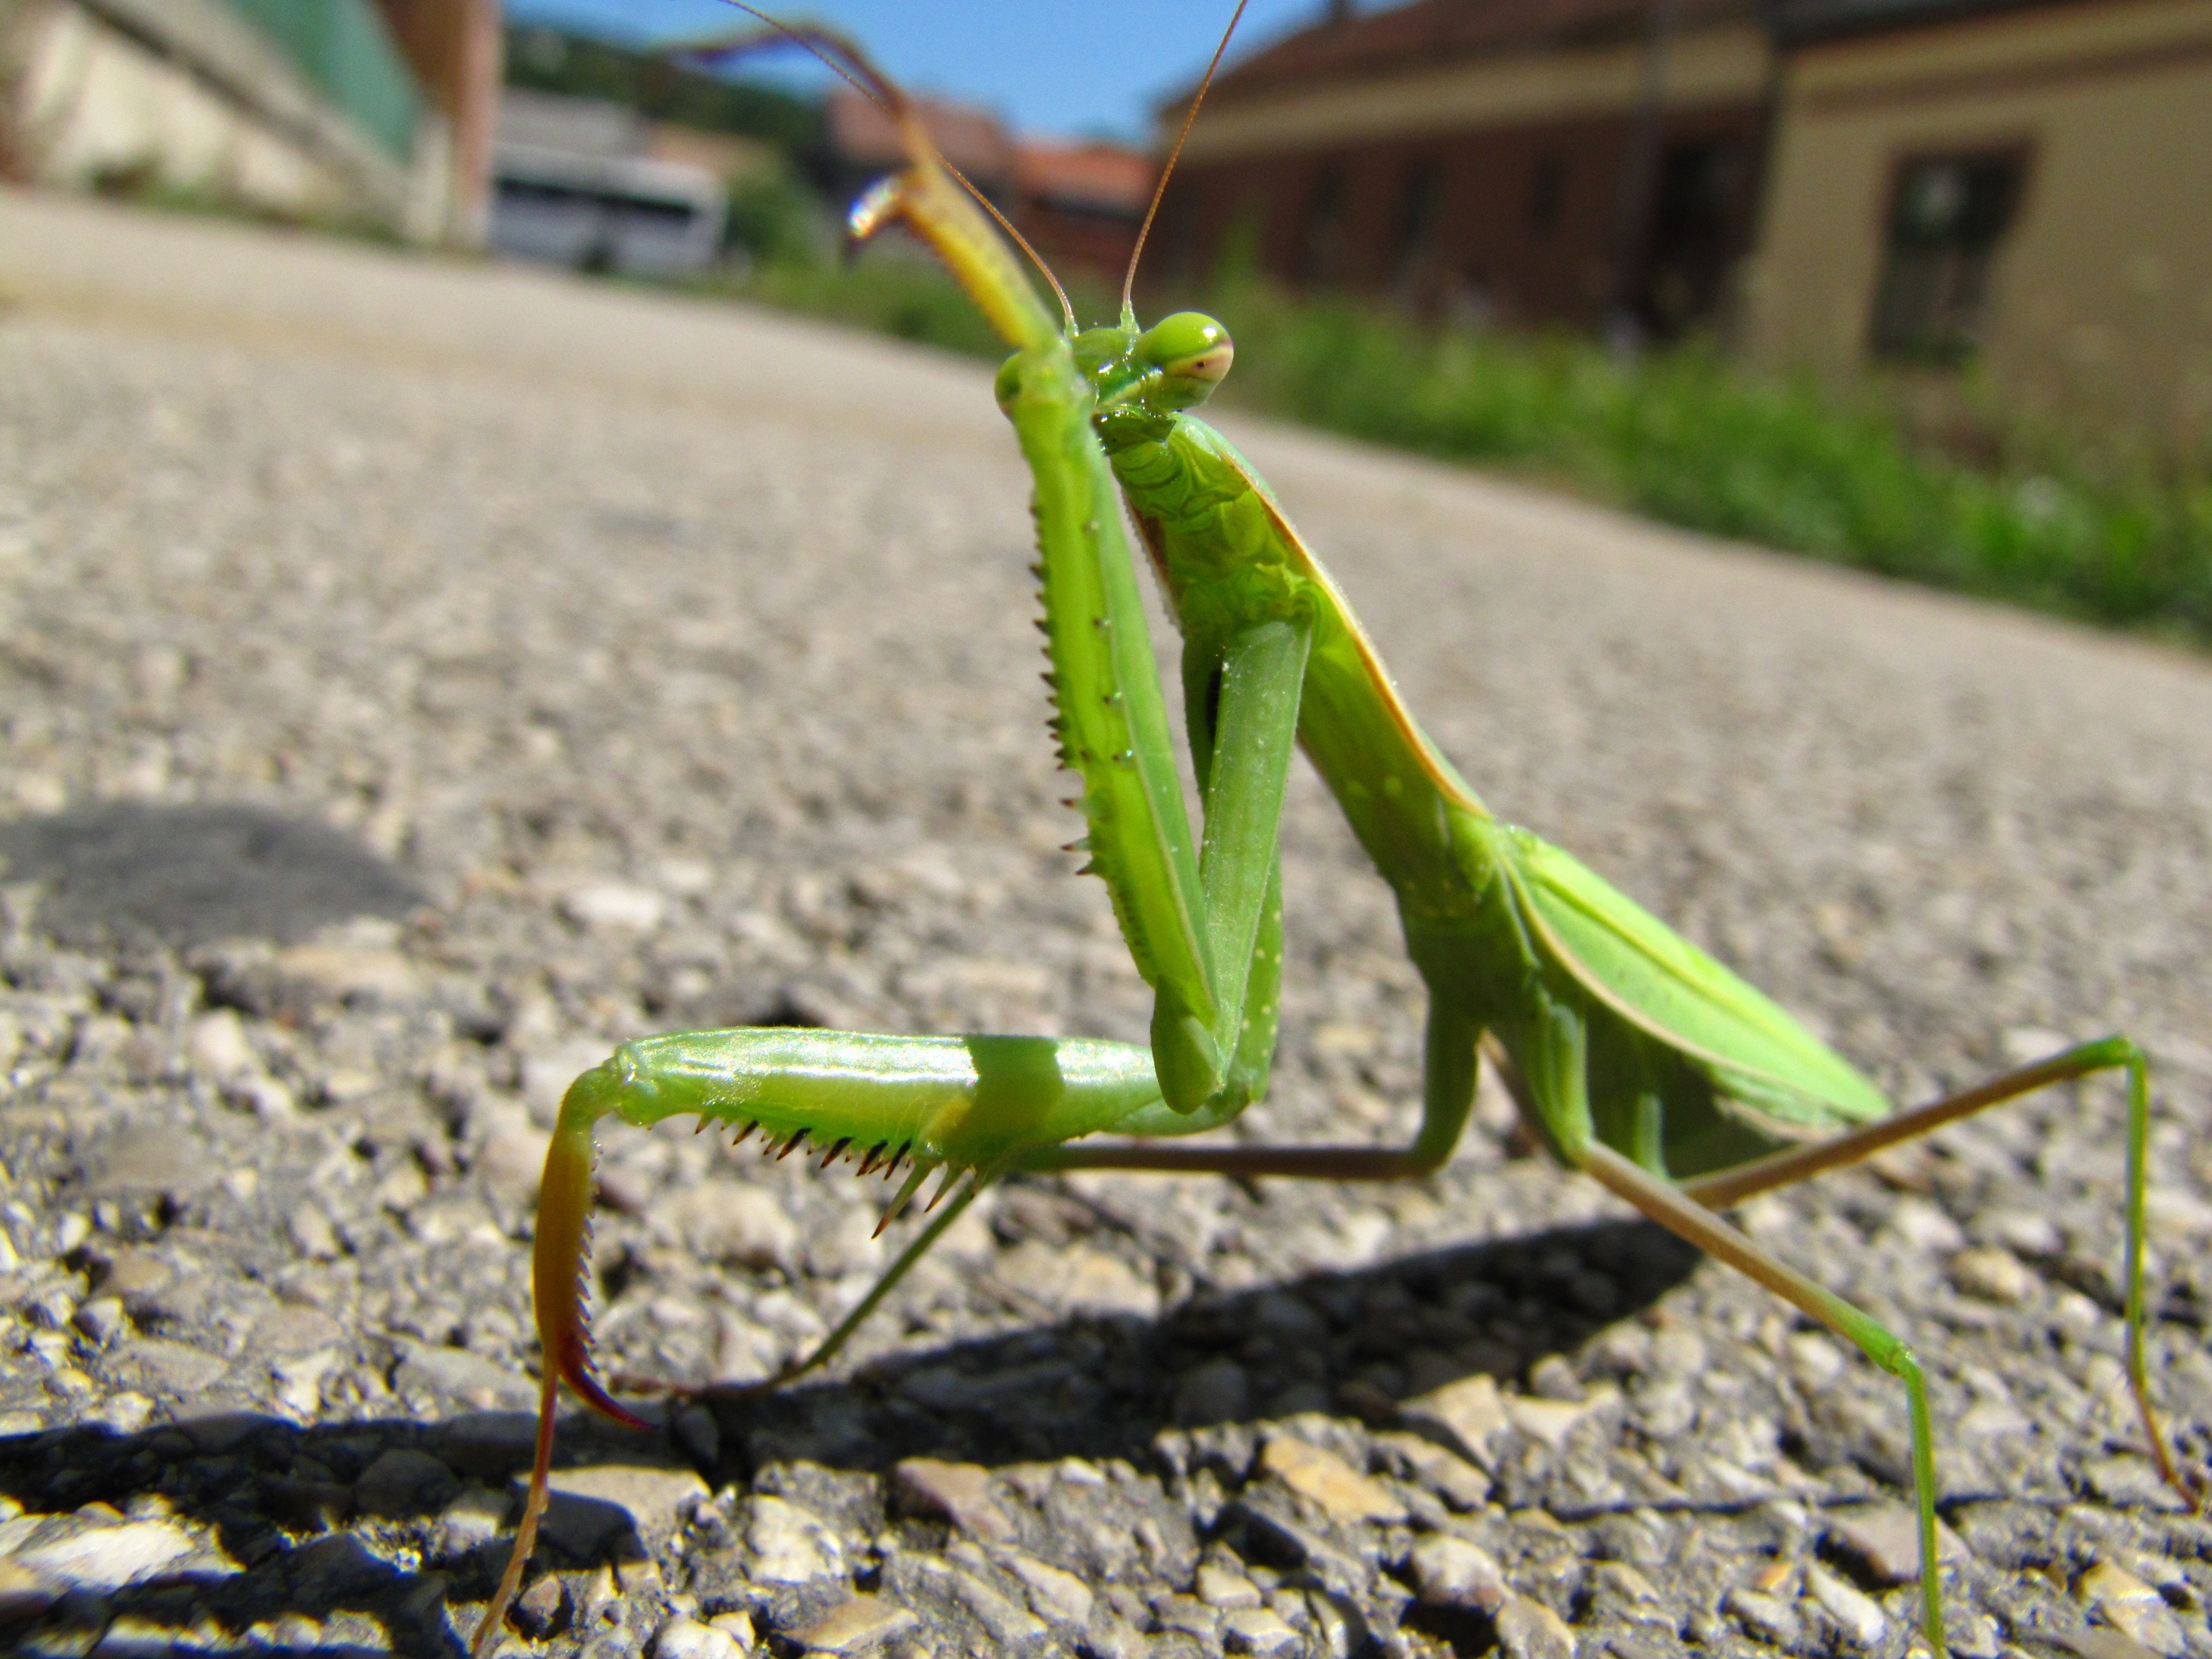 Street, Animal, Praying Mantis, Insect, no people, green color